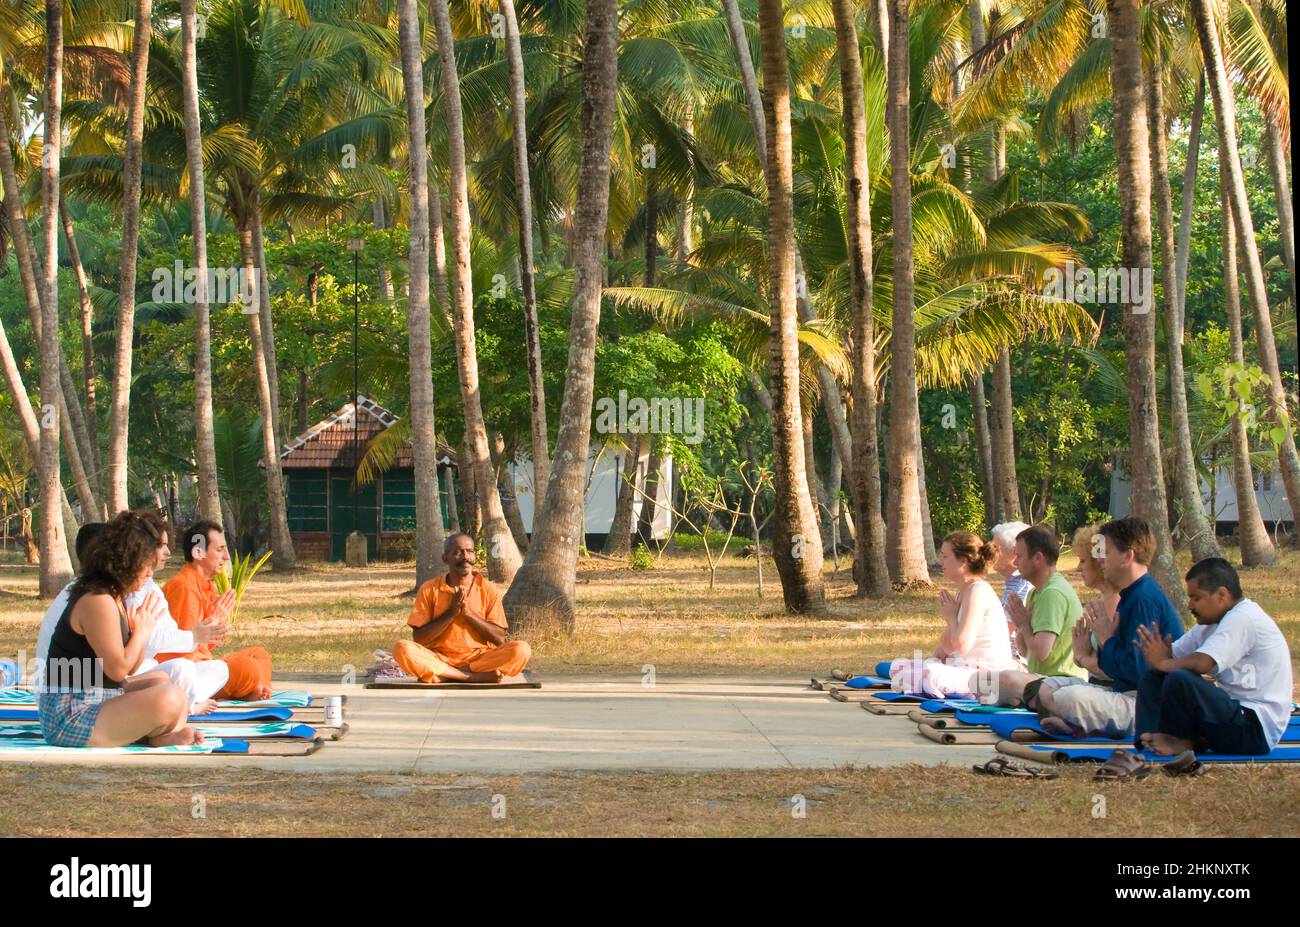 Yoga teacher with pupils seated outdoors surrounded by palm trees in Kerala, India Stock Photo